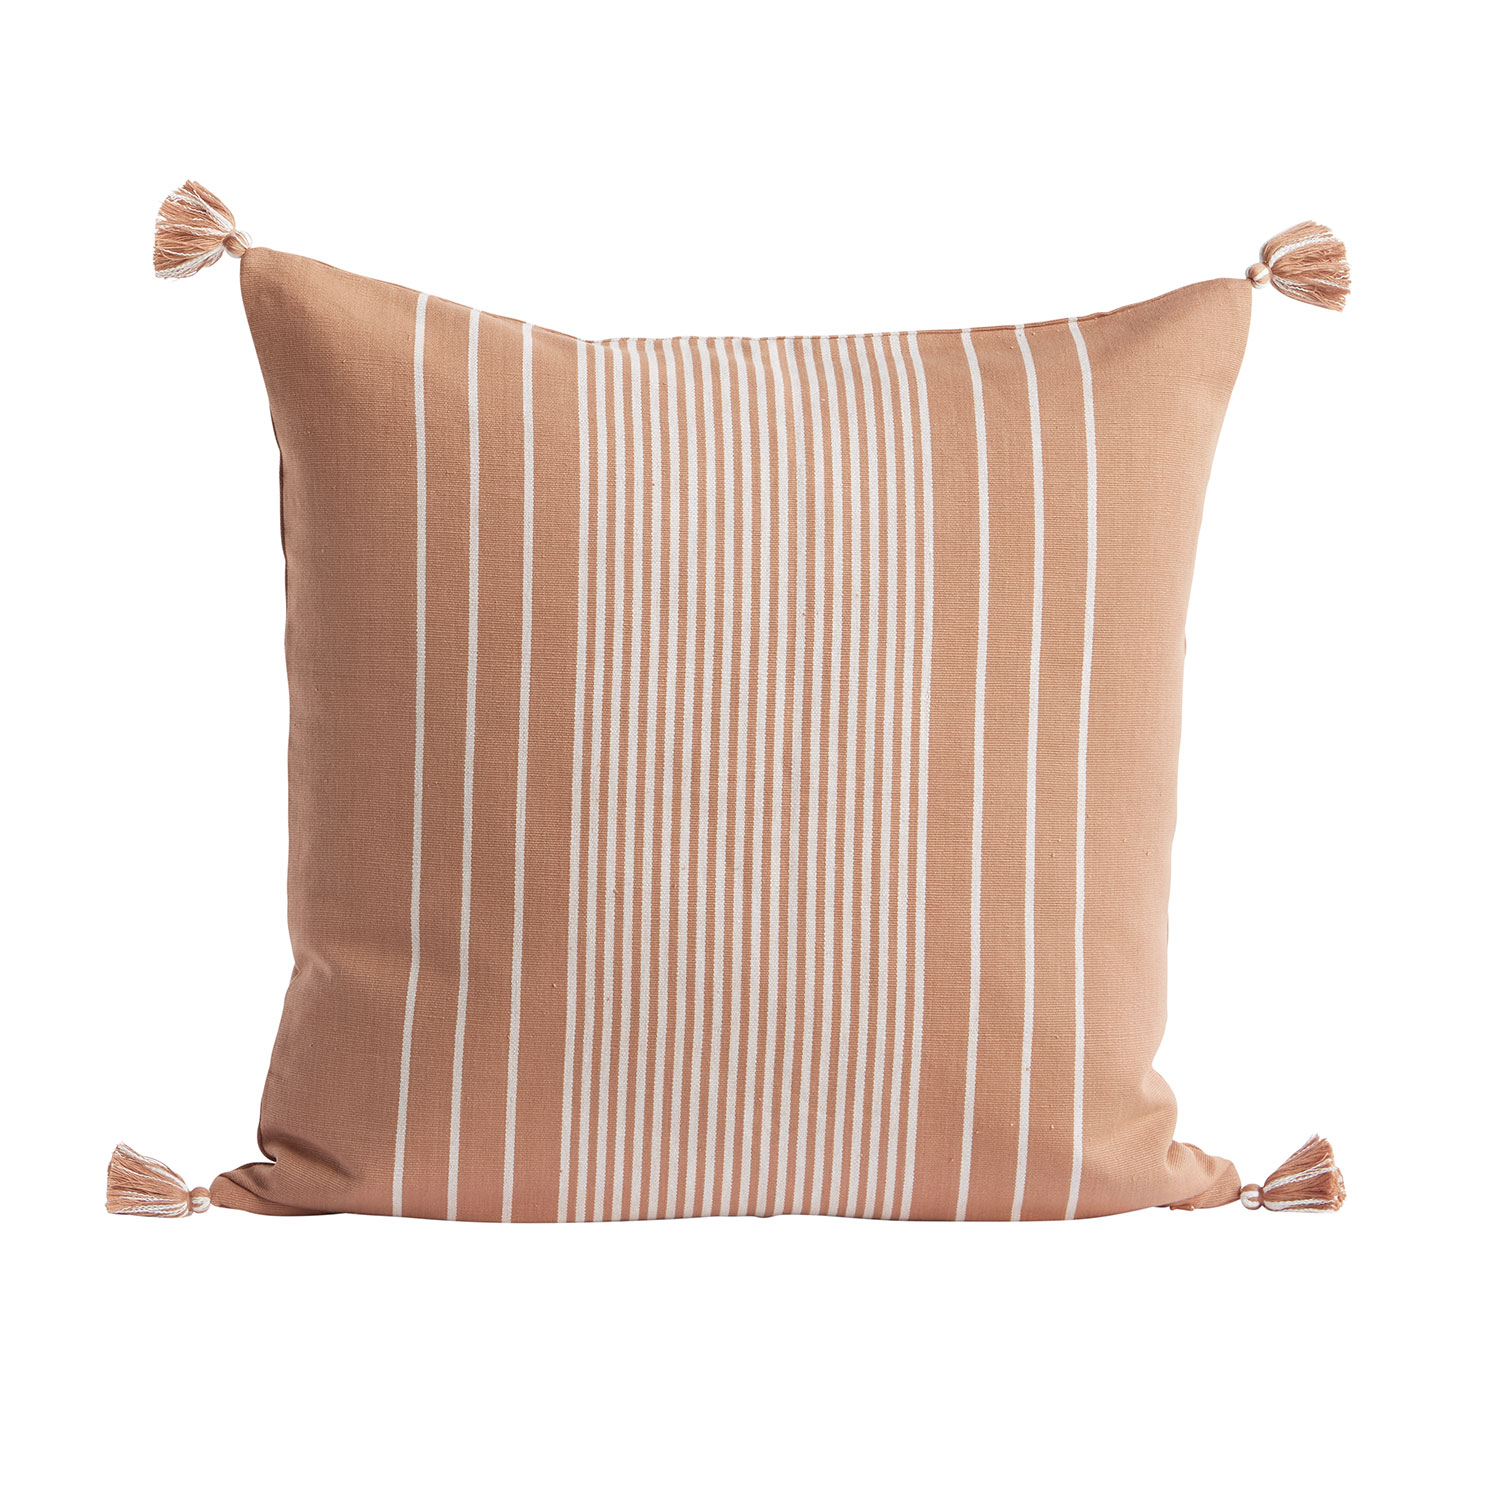 Outdoor cushion cover BAMBOO 60x60